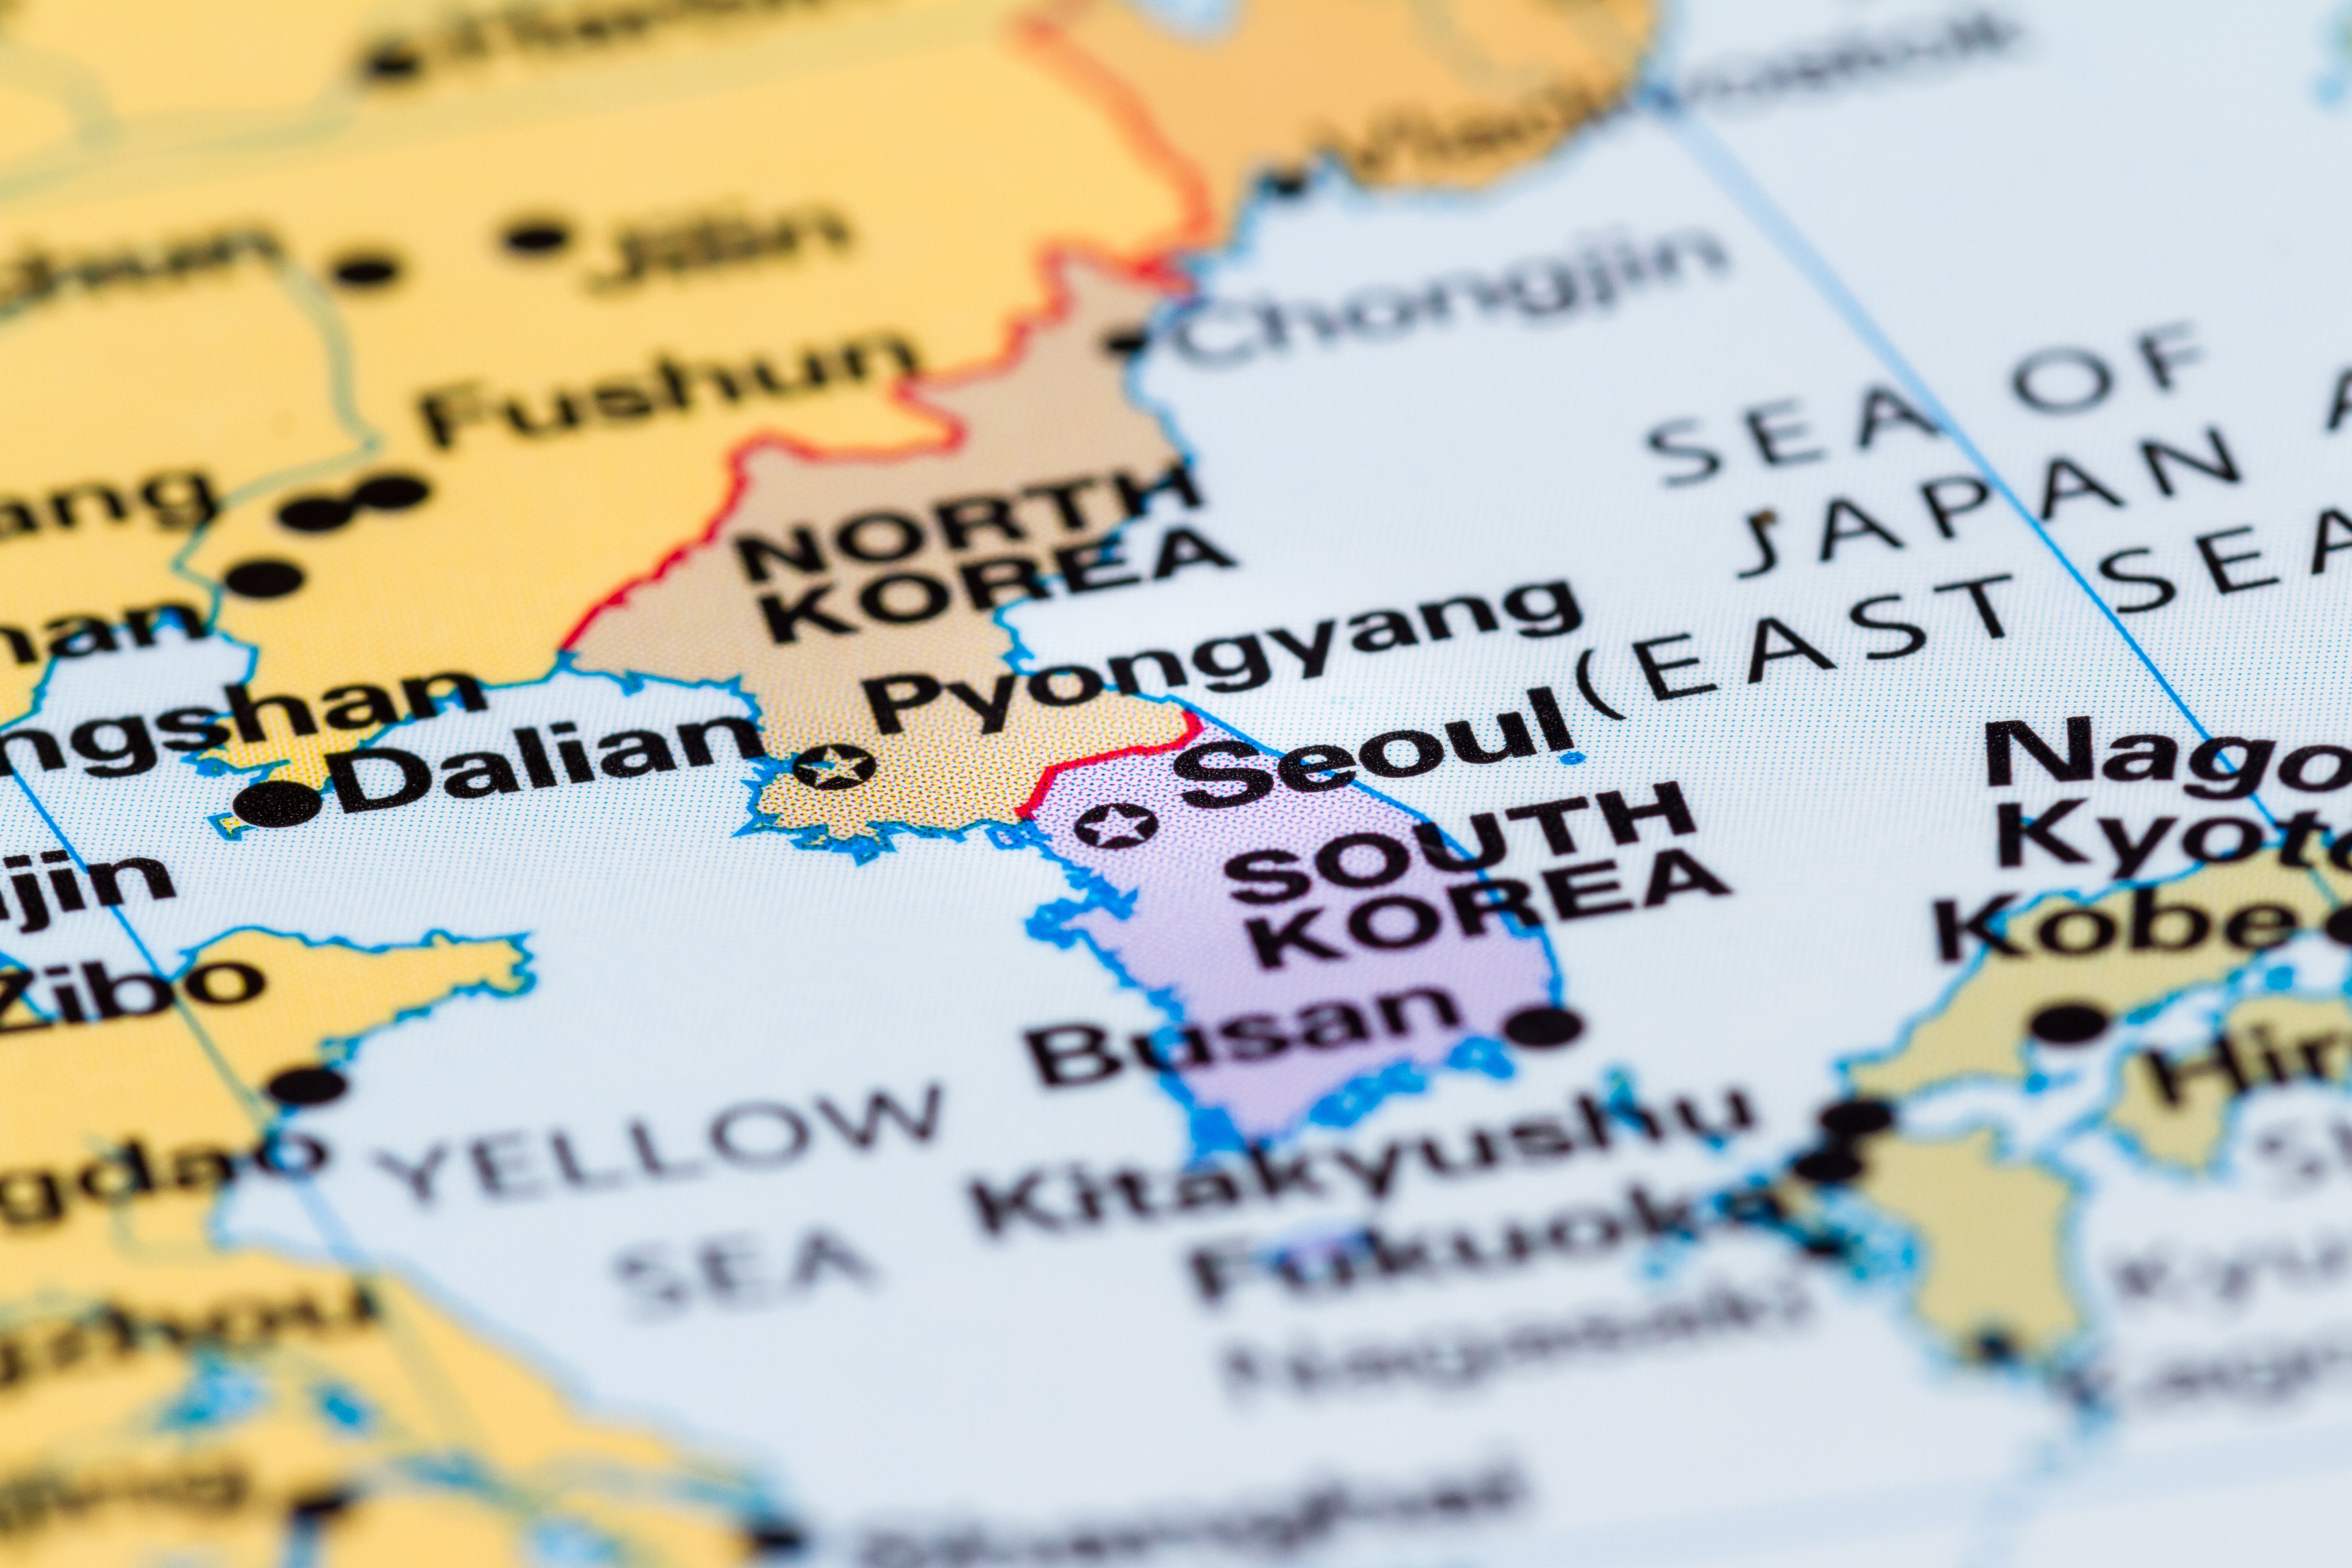 The death of a South Korean fisheries official in territorial waters has prompted a political debate among South Korea’s political parties. Photo: Shutterstock